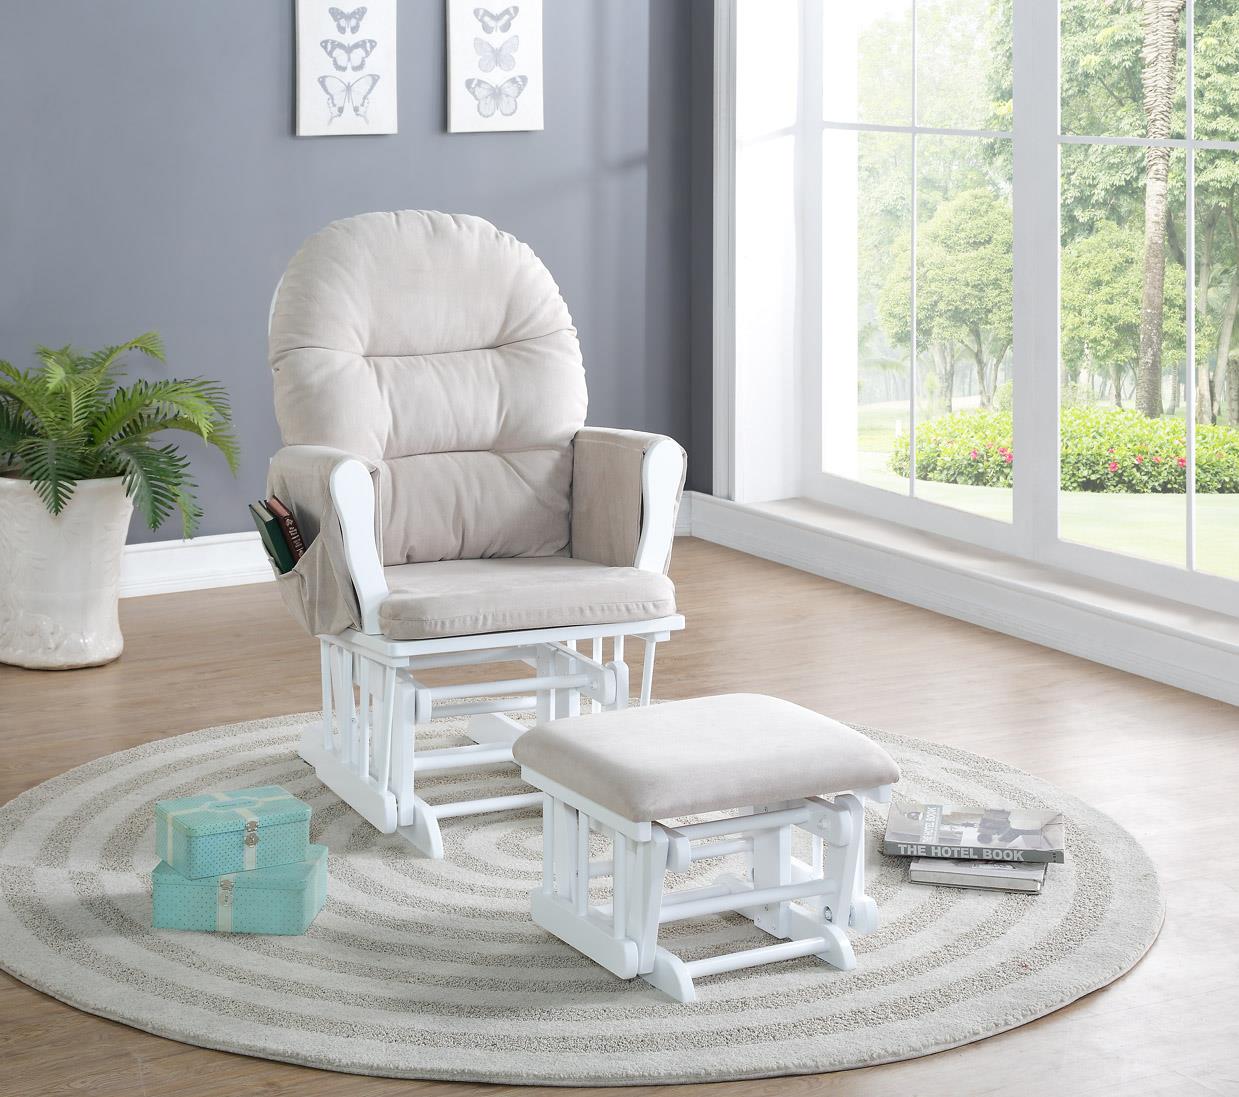 Read more about the article Glider and Ottoman Set Versus Traditional Rocker